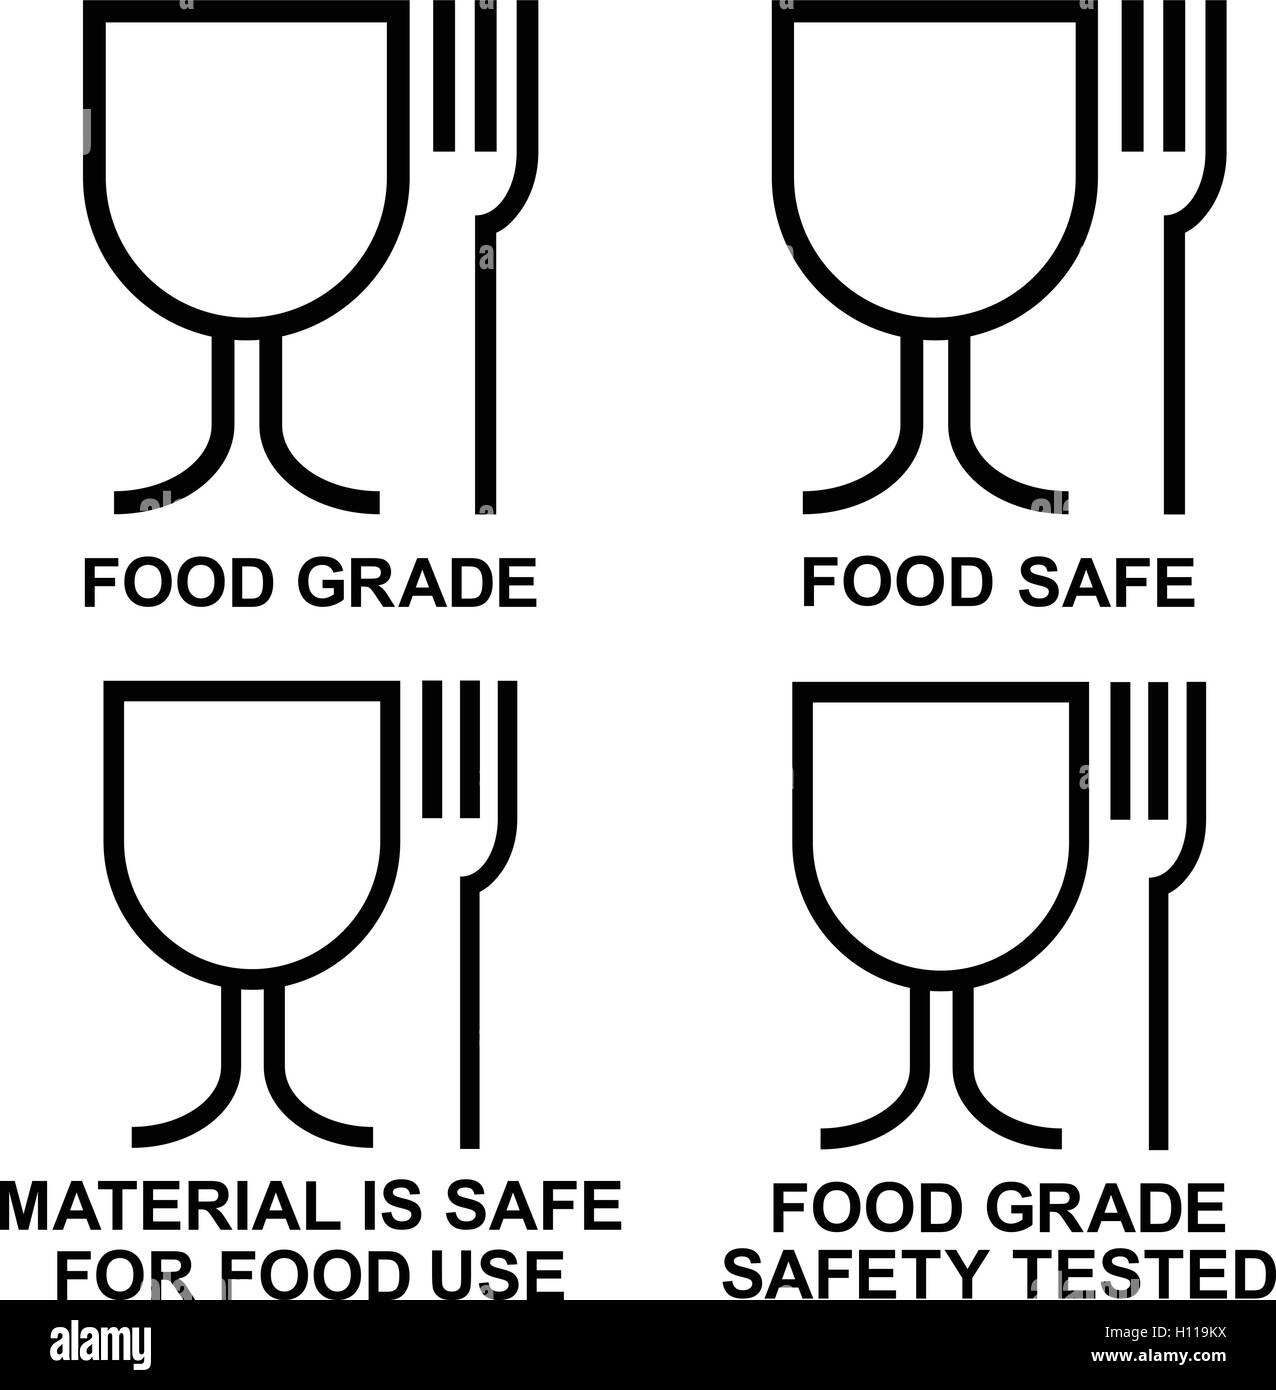 Food grade icon pictogram plastic contact fork Vector Image